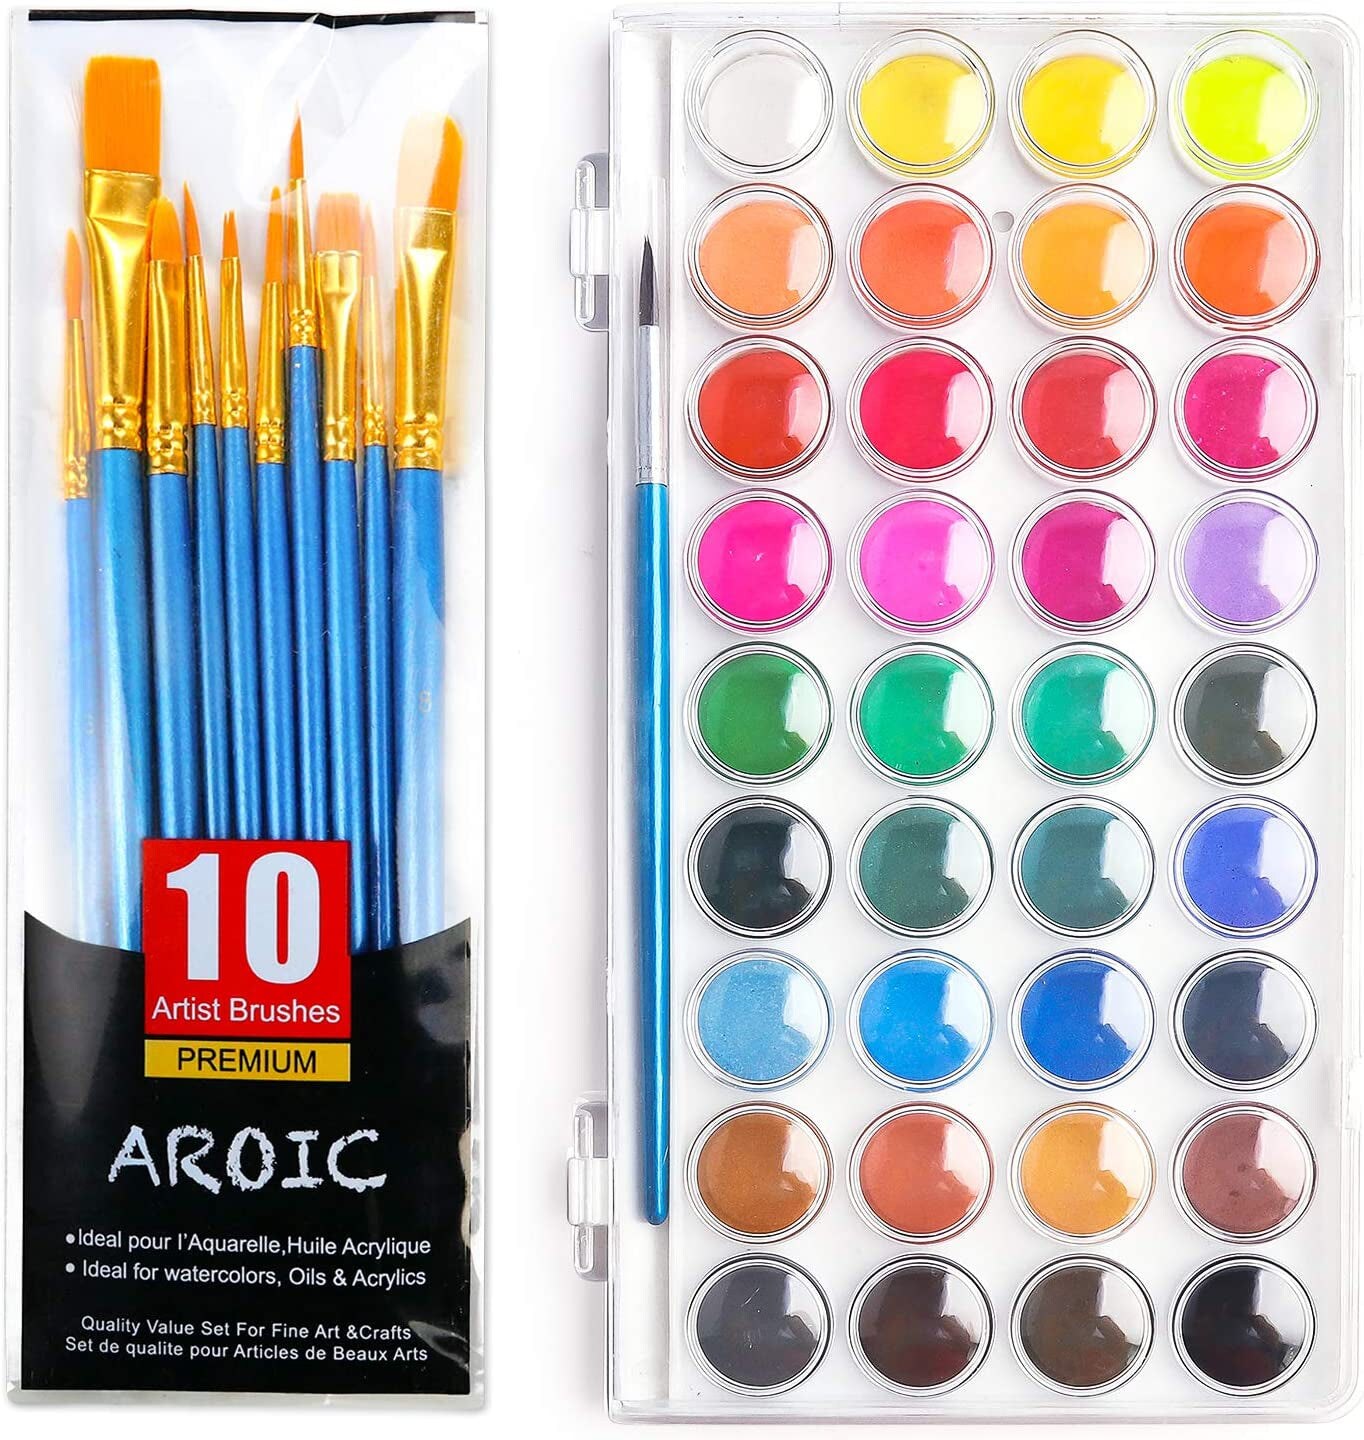 AROIC Watercolor Paint Set, with a Watercolor Paint, 48 Color, a Brush and  a Refillable Water Brush Pen. The Best Gift for Beginners, Children and Art